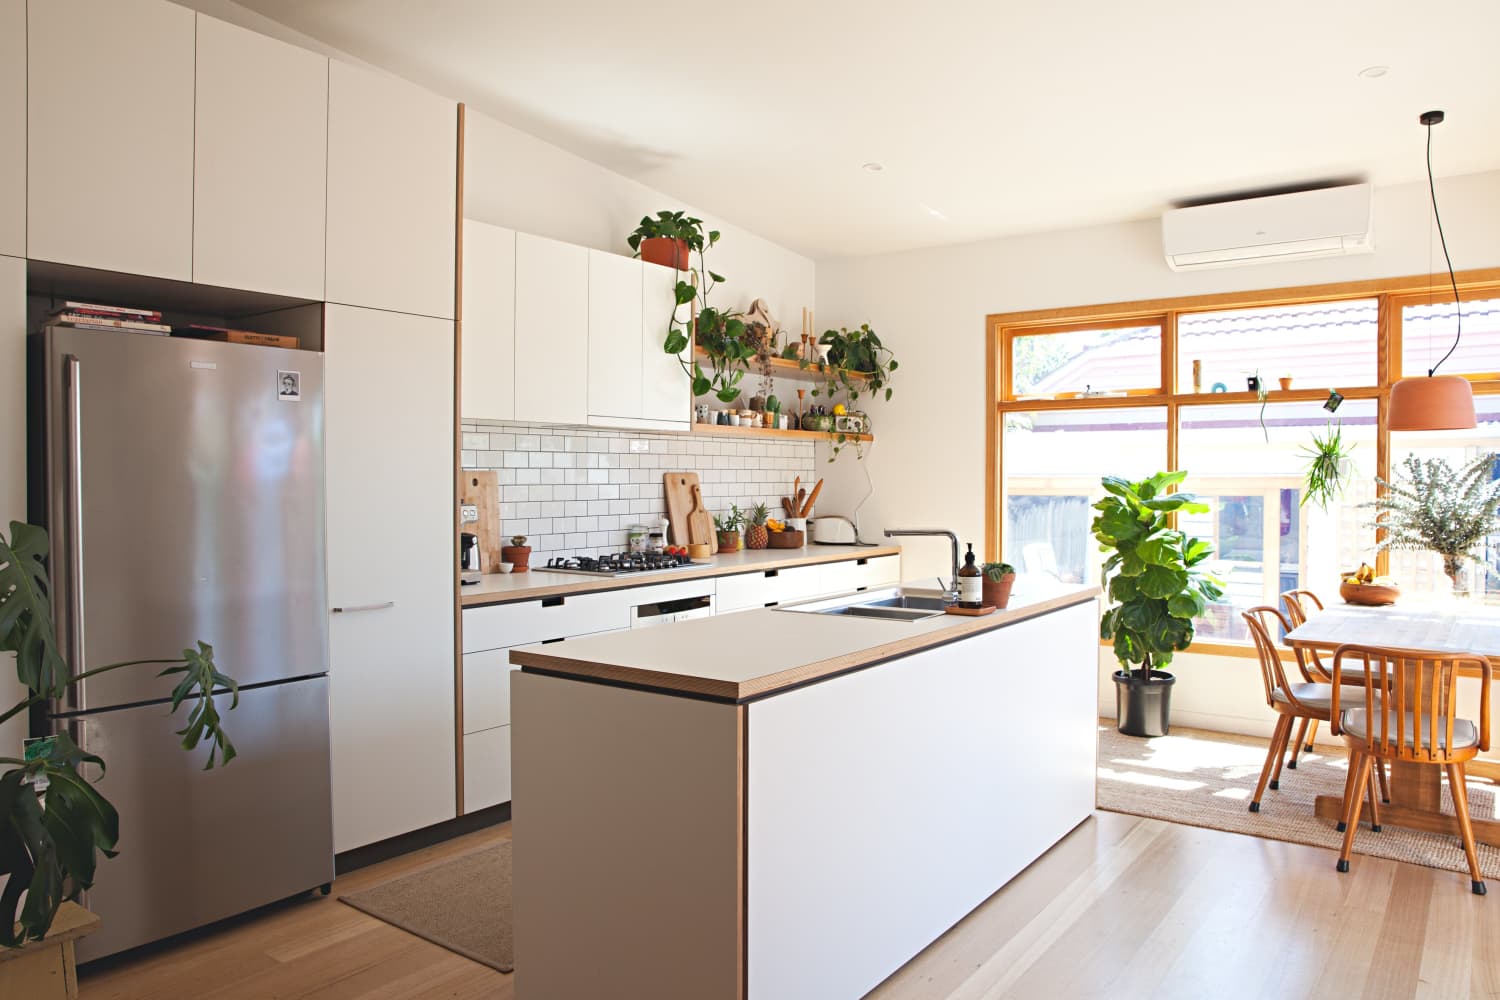 15 Tiny Home Kitchens to Inspire You